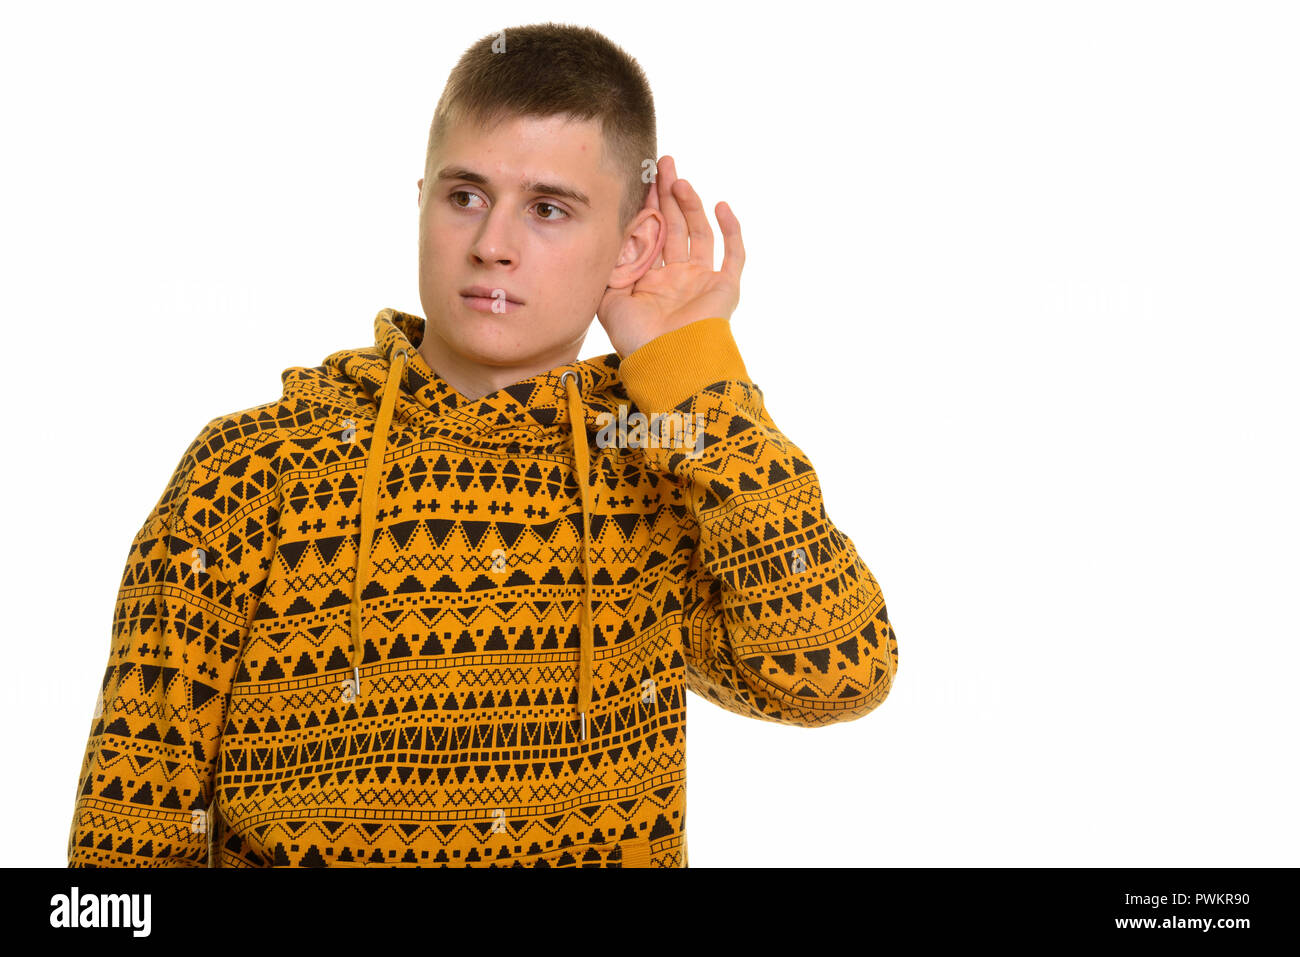 Young curious Caucasian man listening while cupping ear Stock Photo